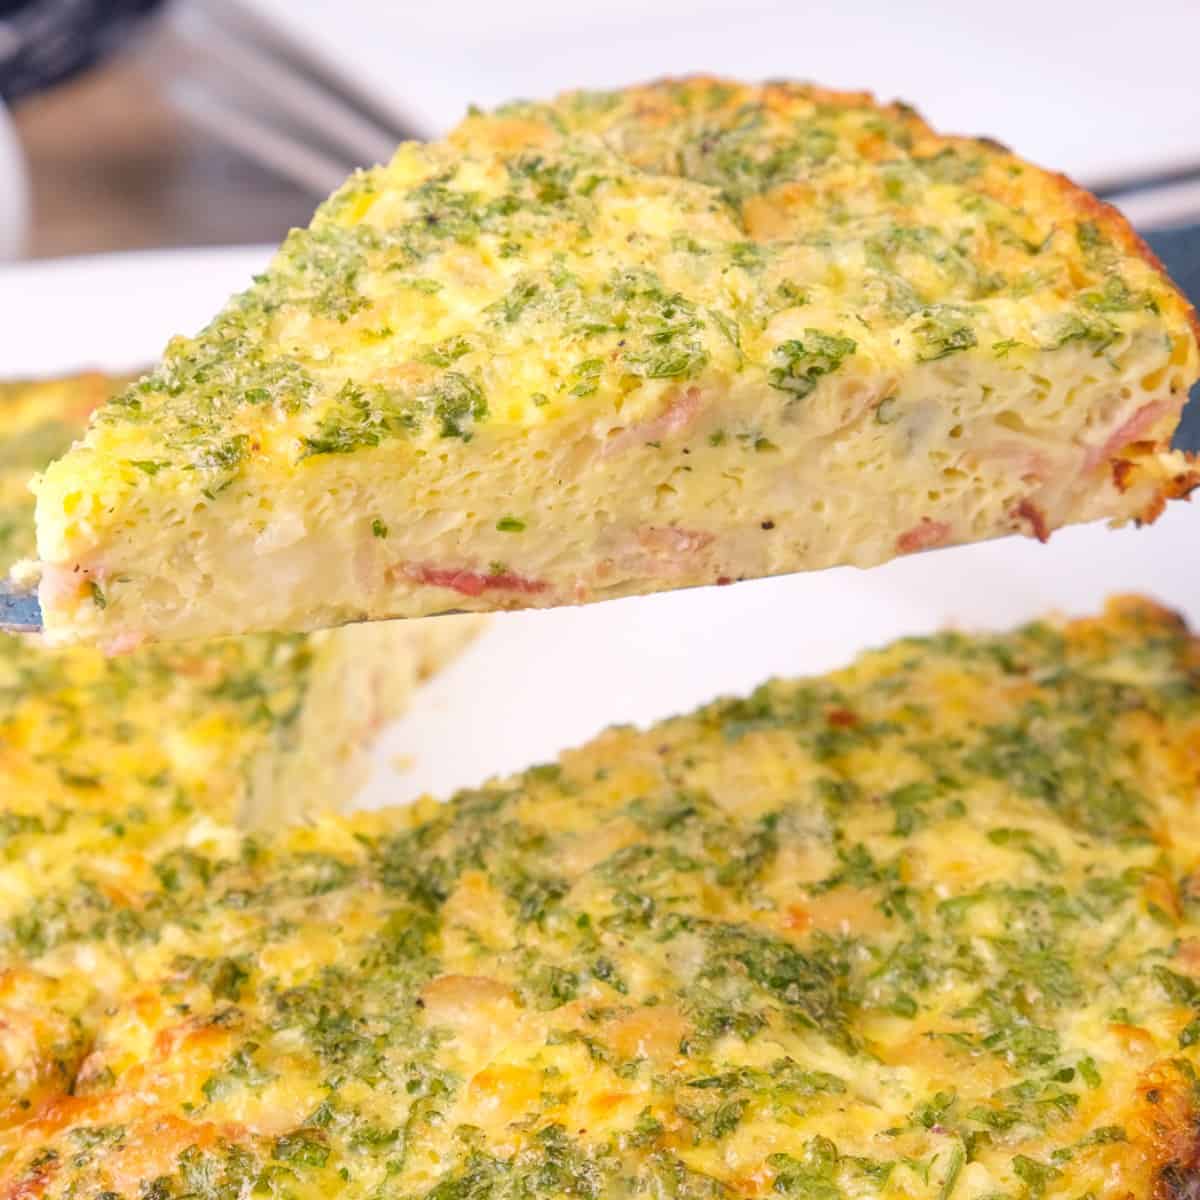 A slice taken from a circular keto crustless quiche, lifted to show its texture.